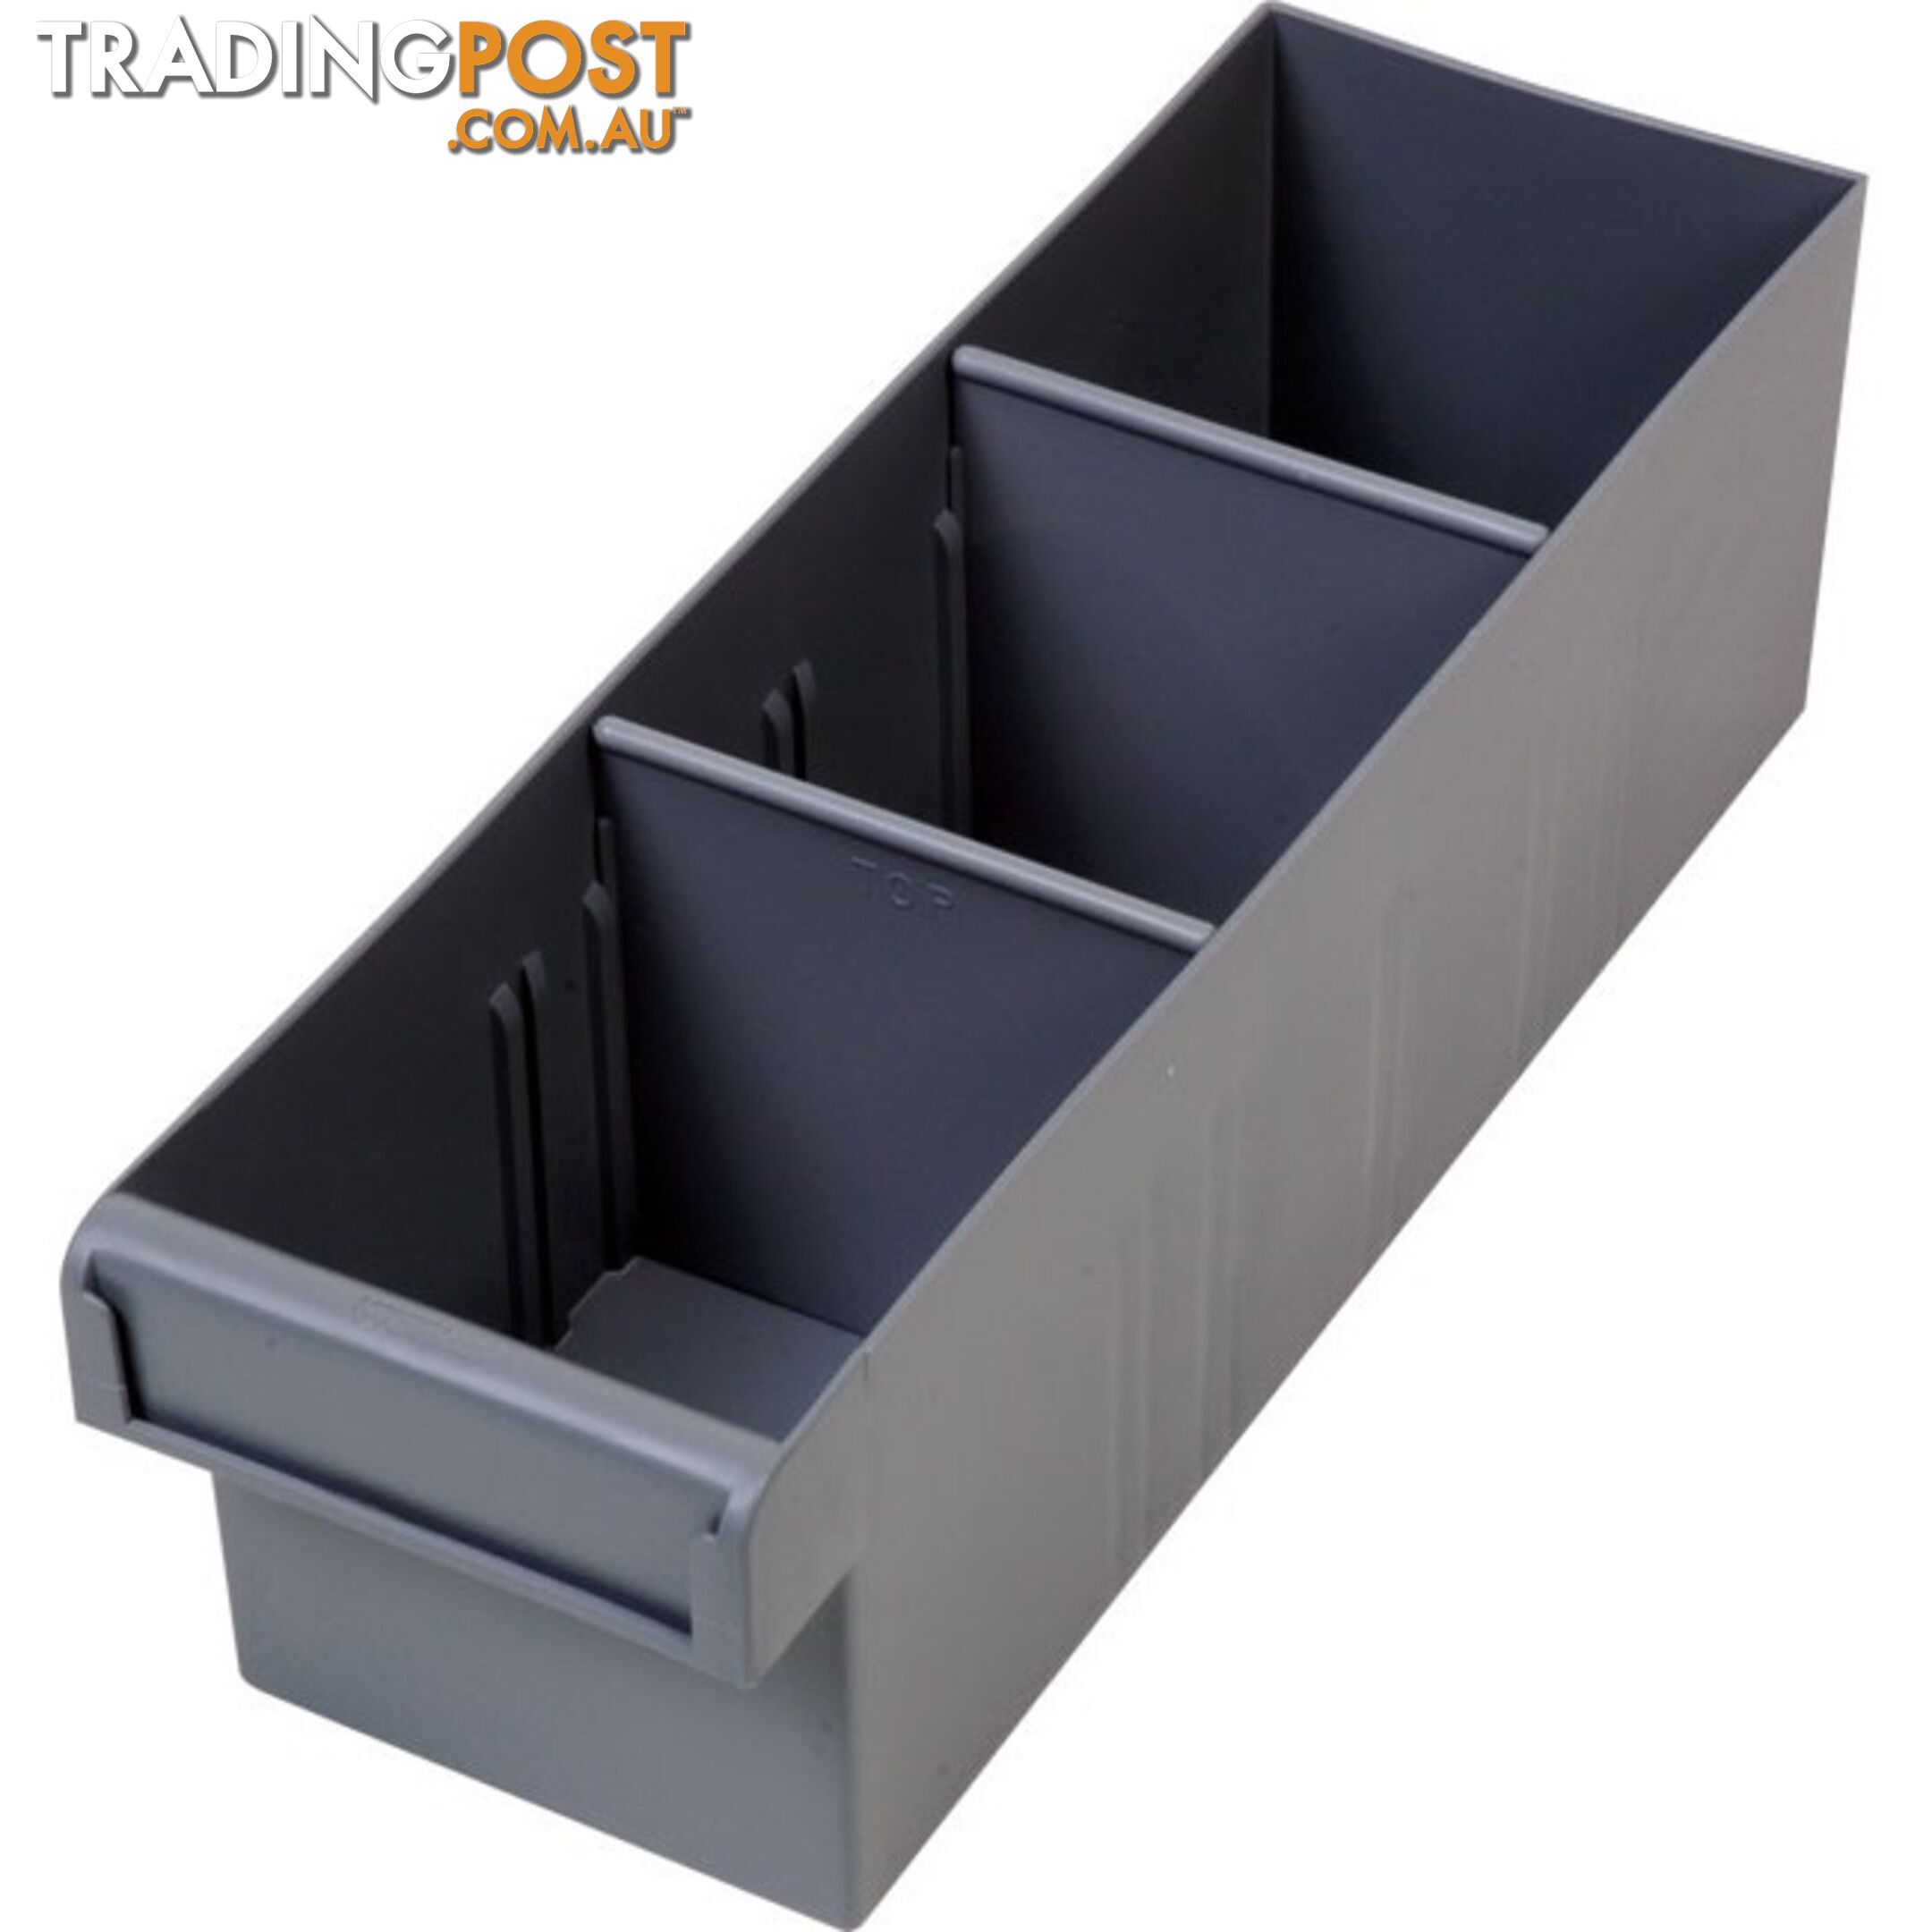 1H012GR GREY 300MM MEDIUM PARTS TRAY STORAGE DRAWER WITH DIVIDERS